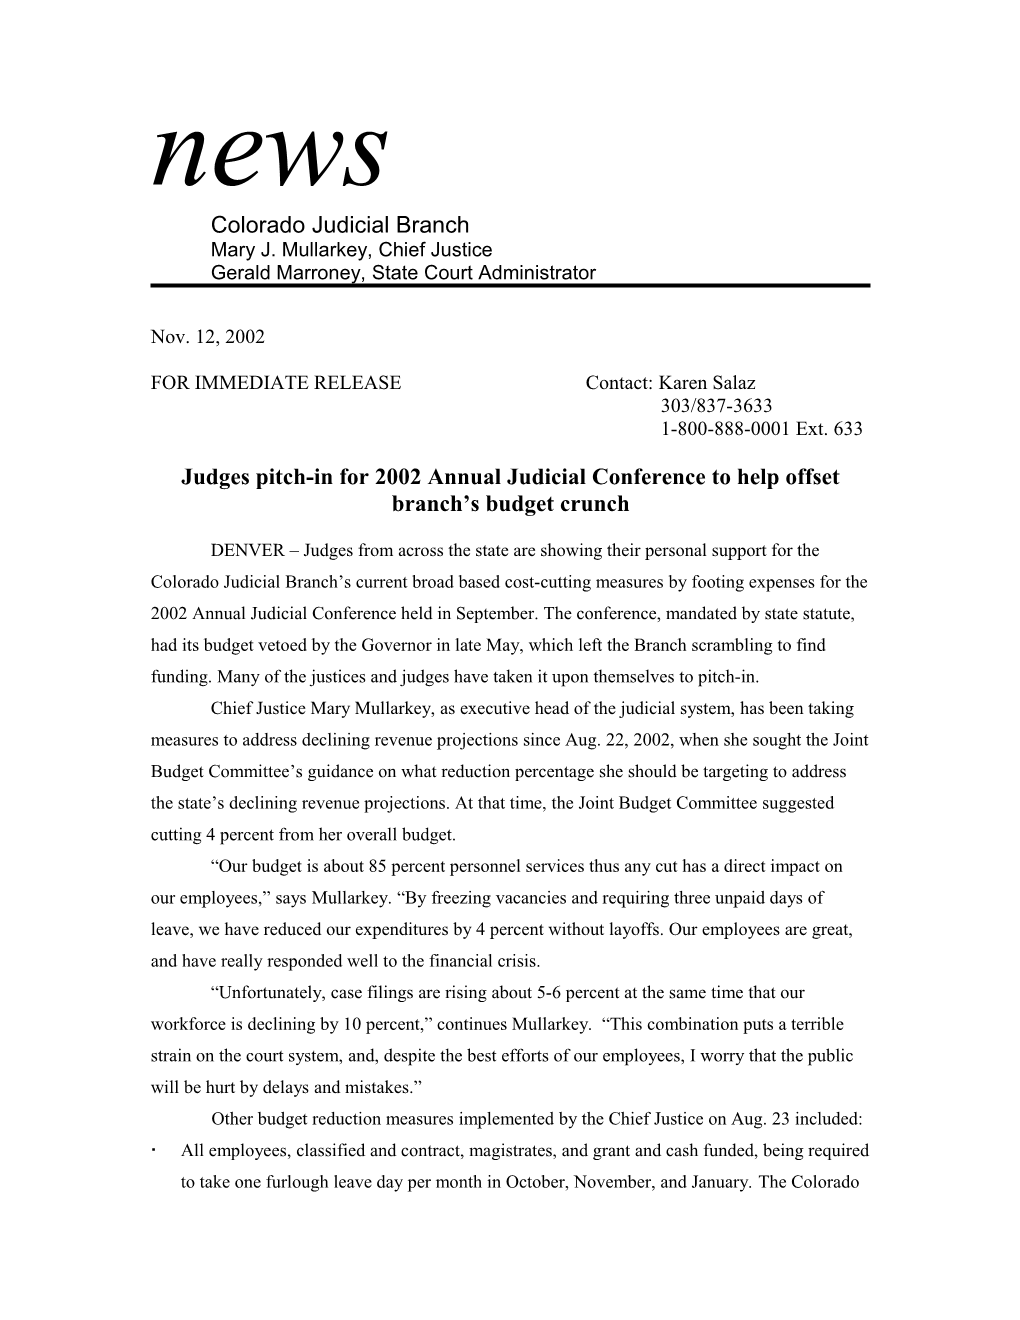 Judges Pitch-In for 2002 Annual Judicial Conference to Help Offset Branch S Budget Crunch